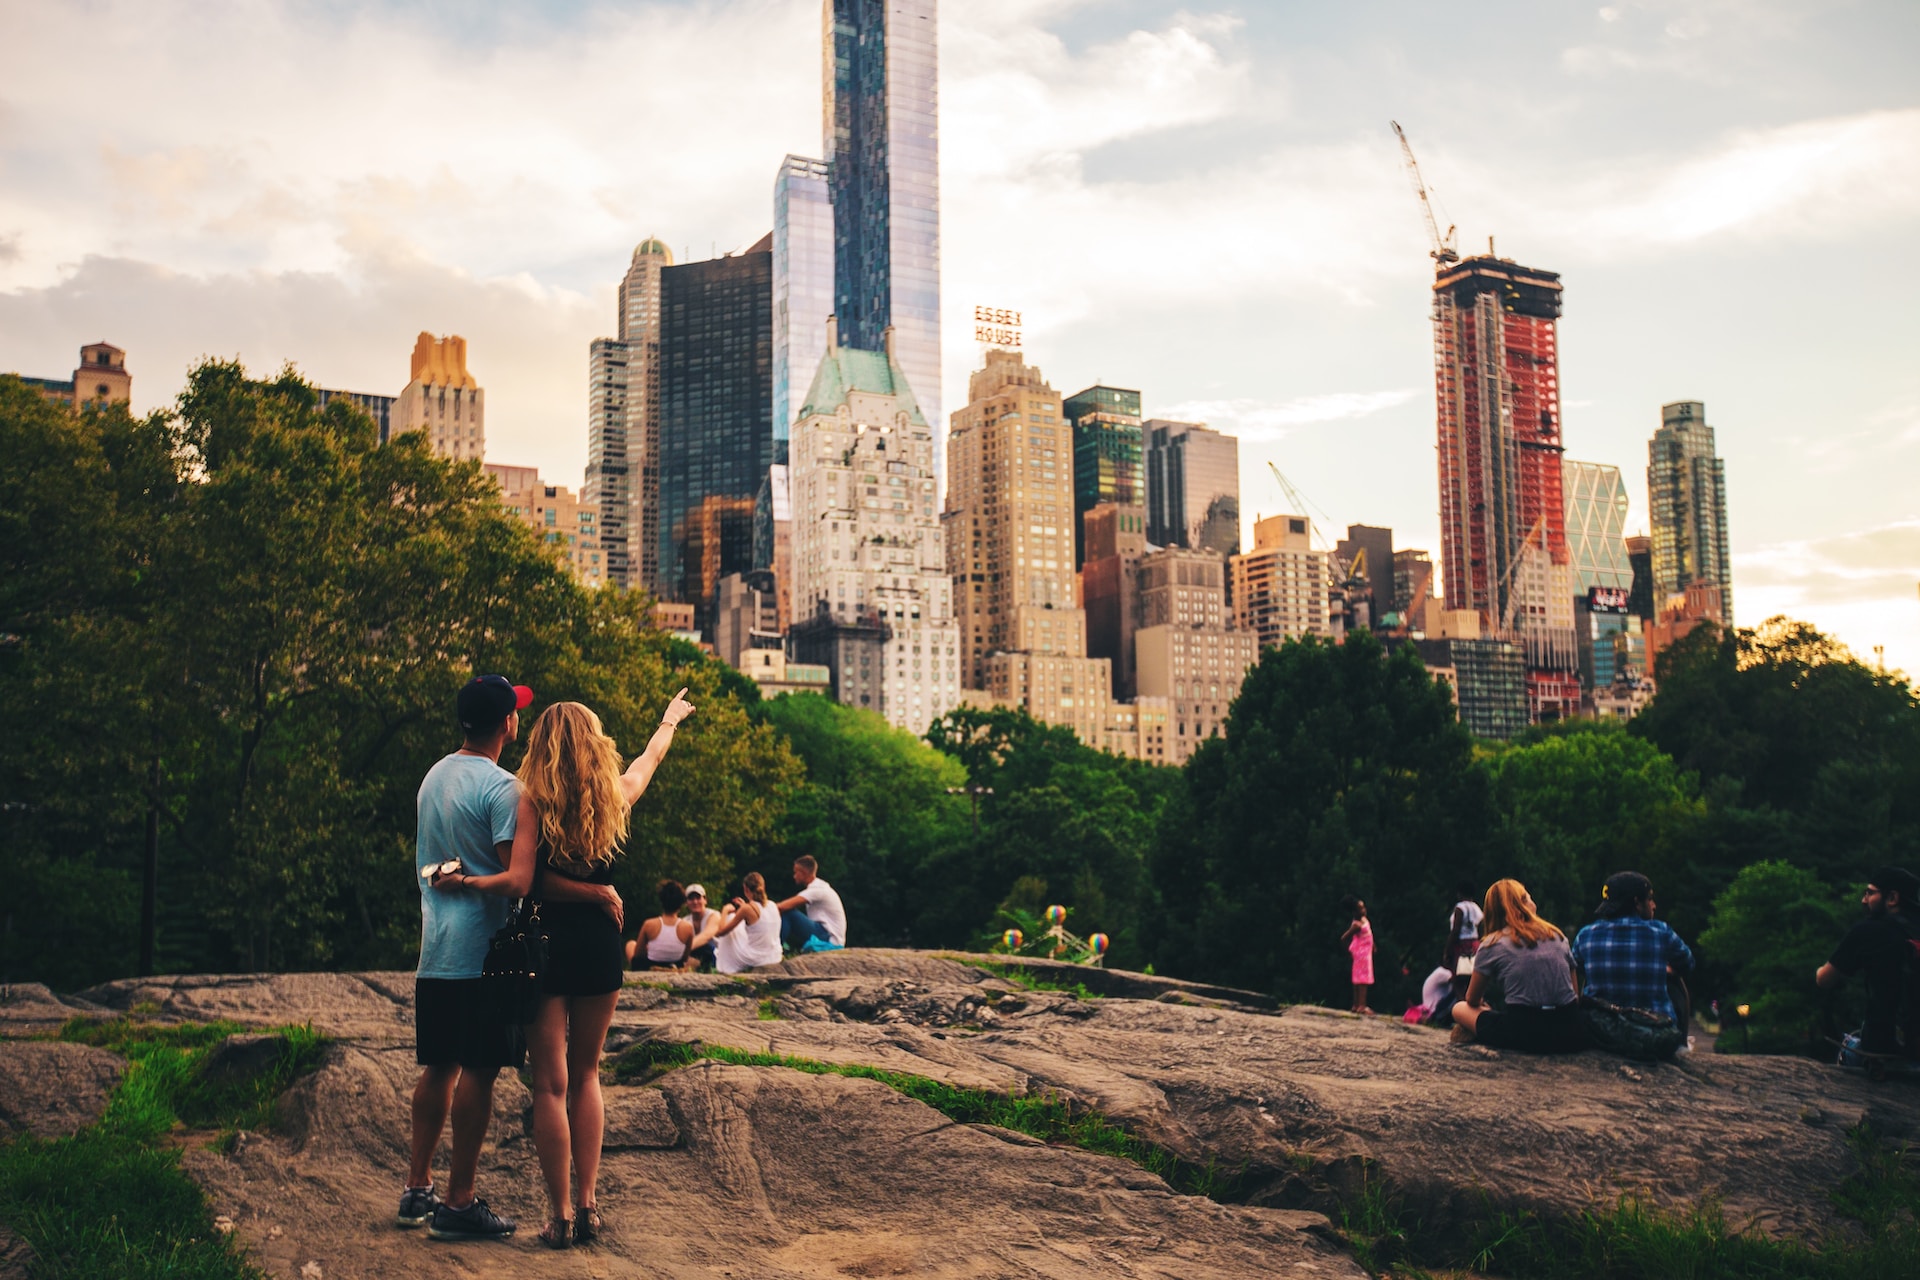 A couple enjoying the Central Park in NYC.